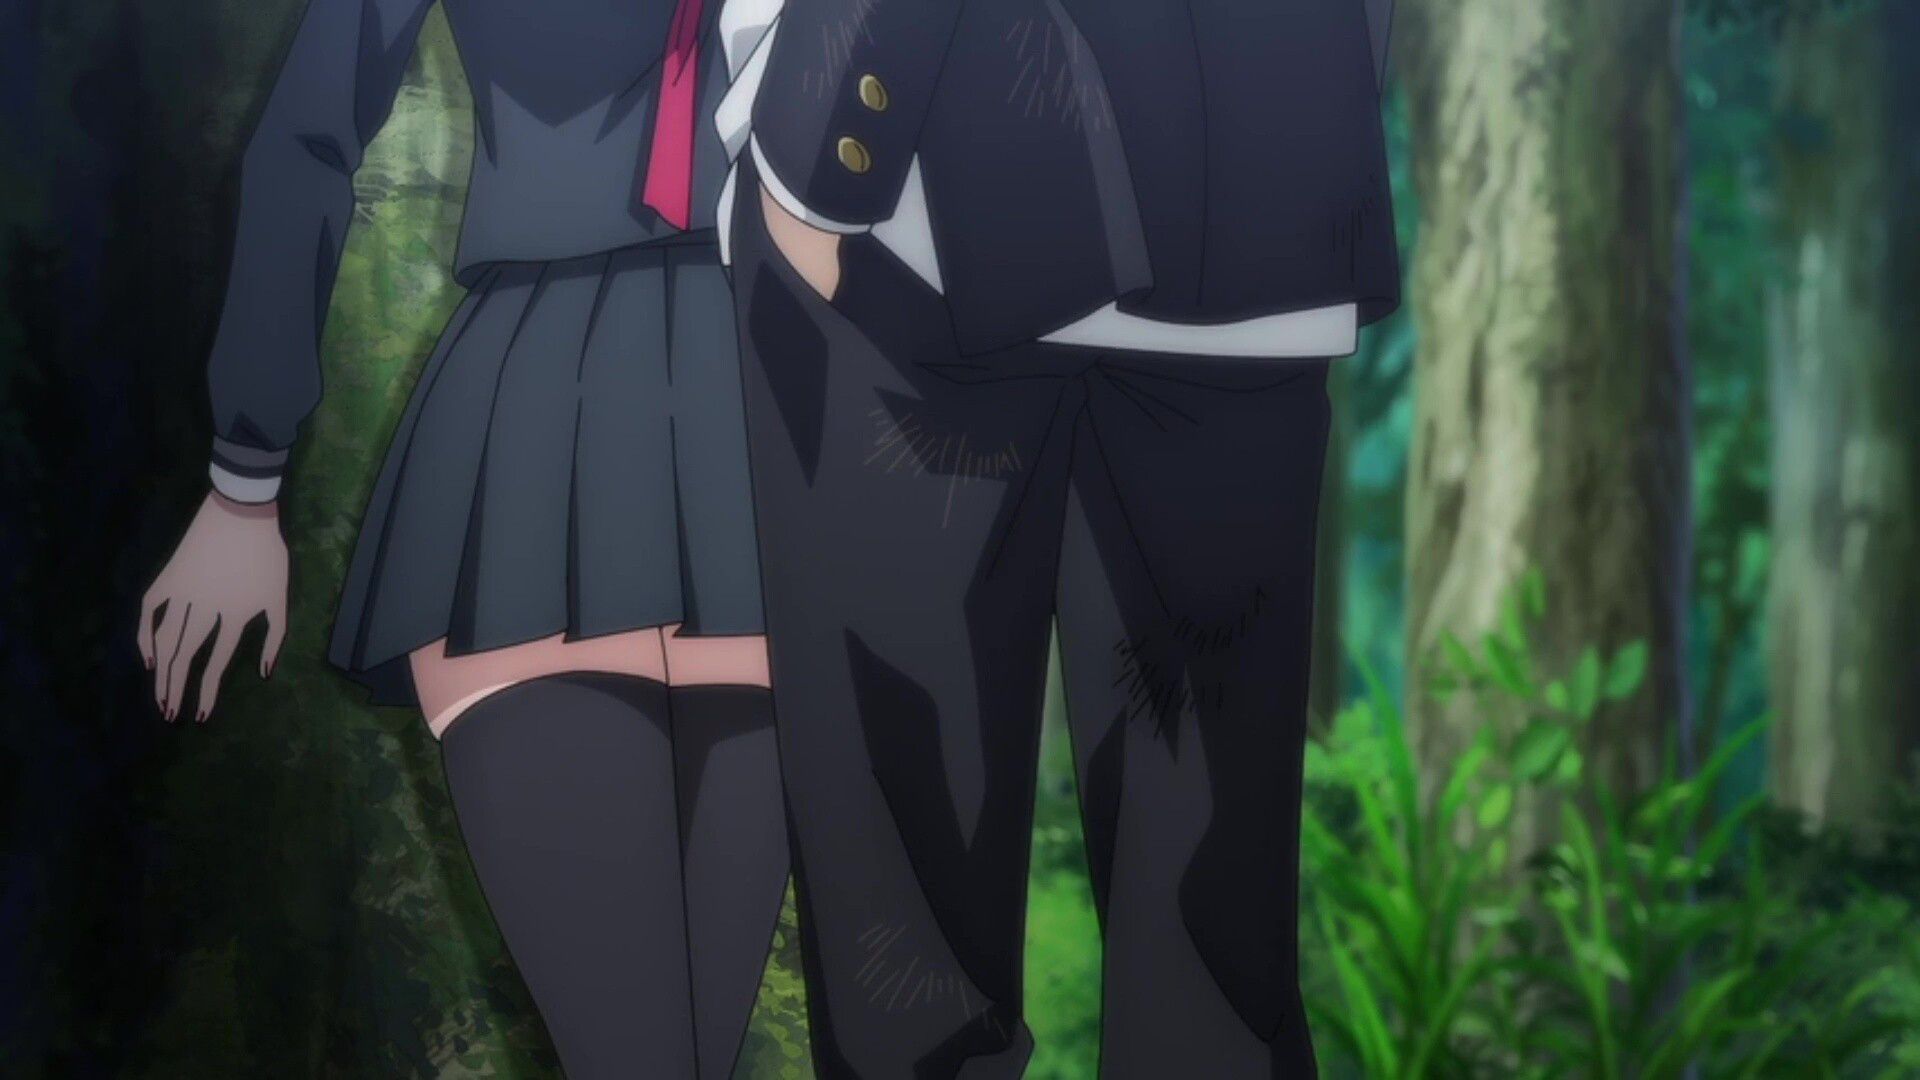 In episode 9 of the anime "Tomodachi Game", an erotic scene in which pants and bra are transparent in the depiction of underwear that is too erotic 5